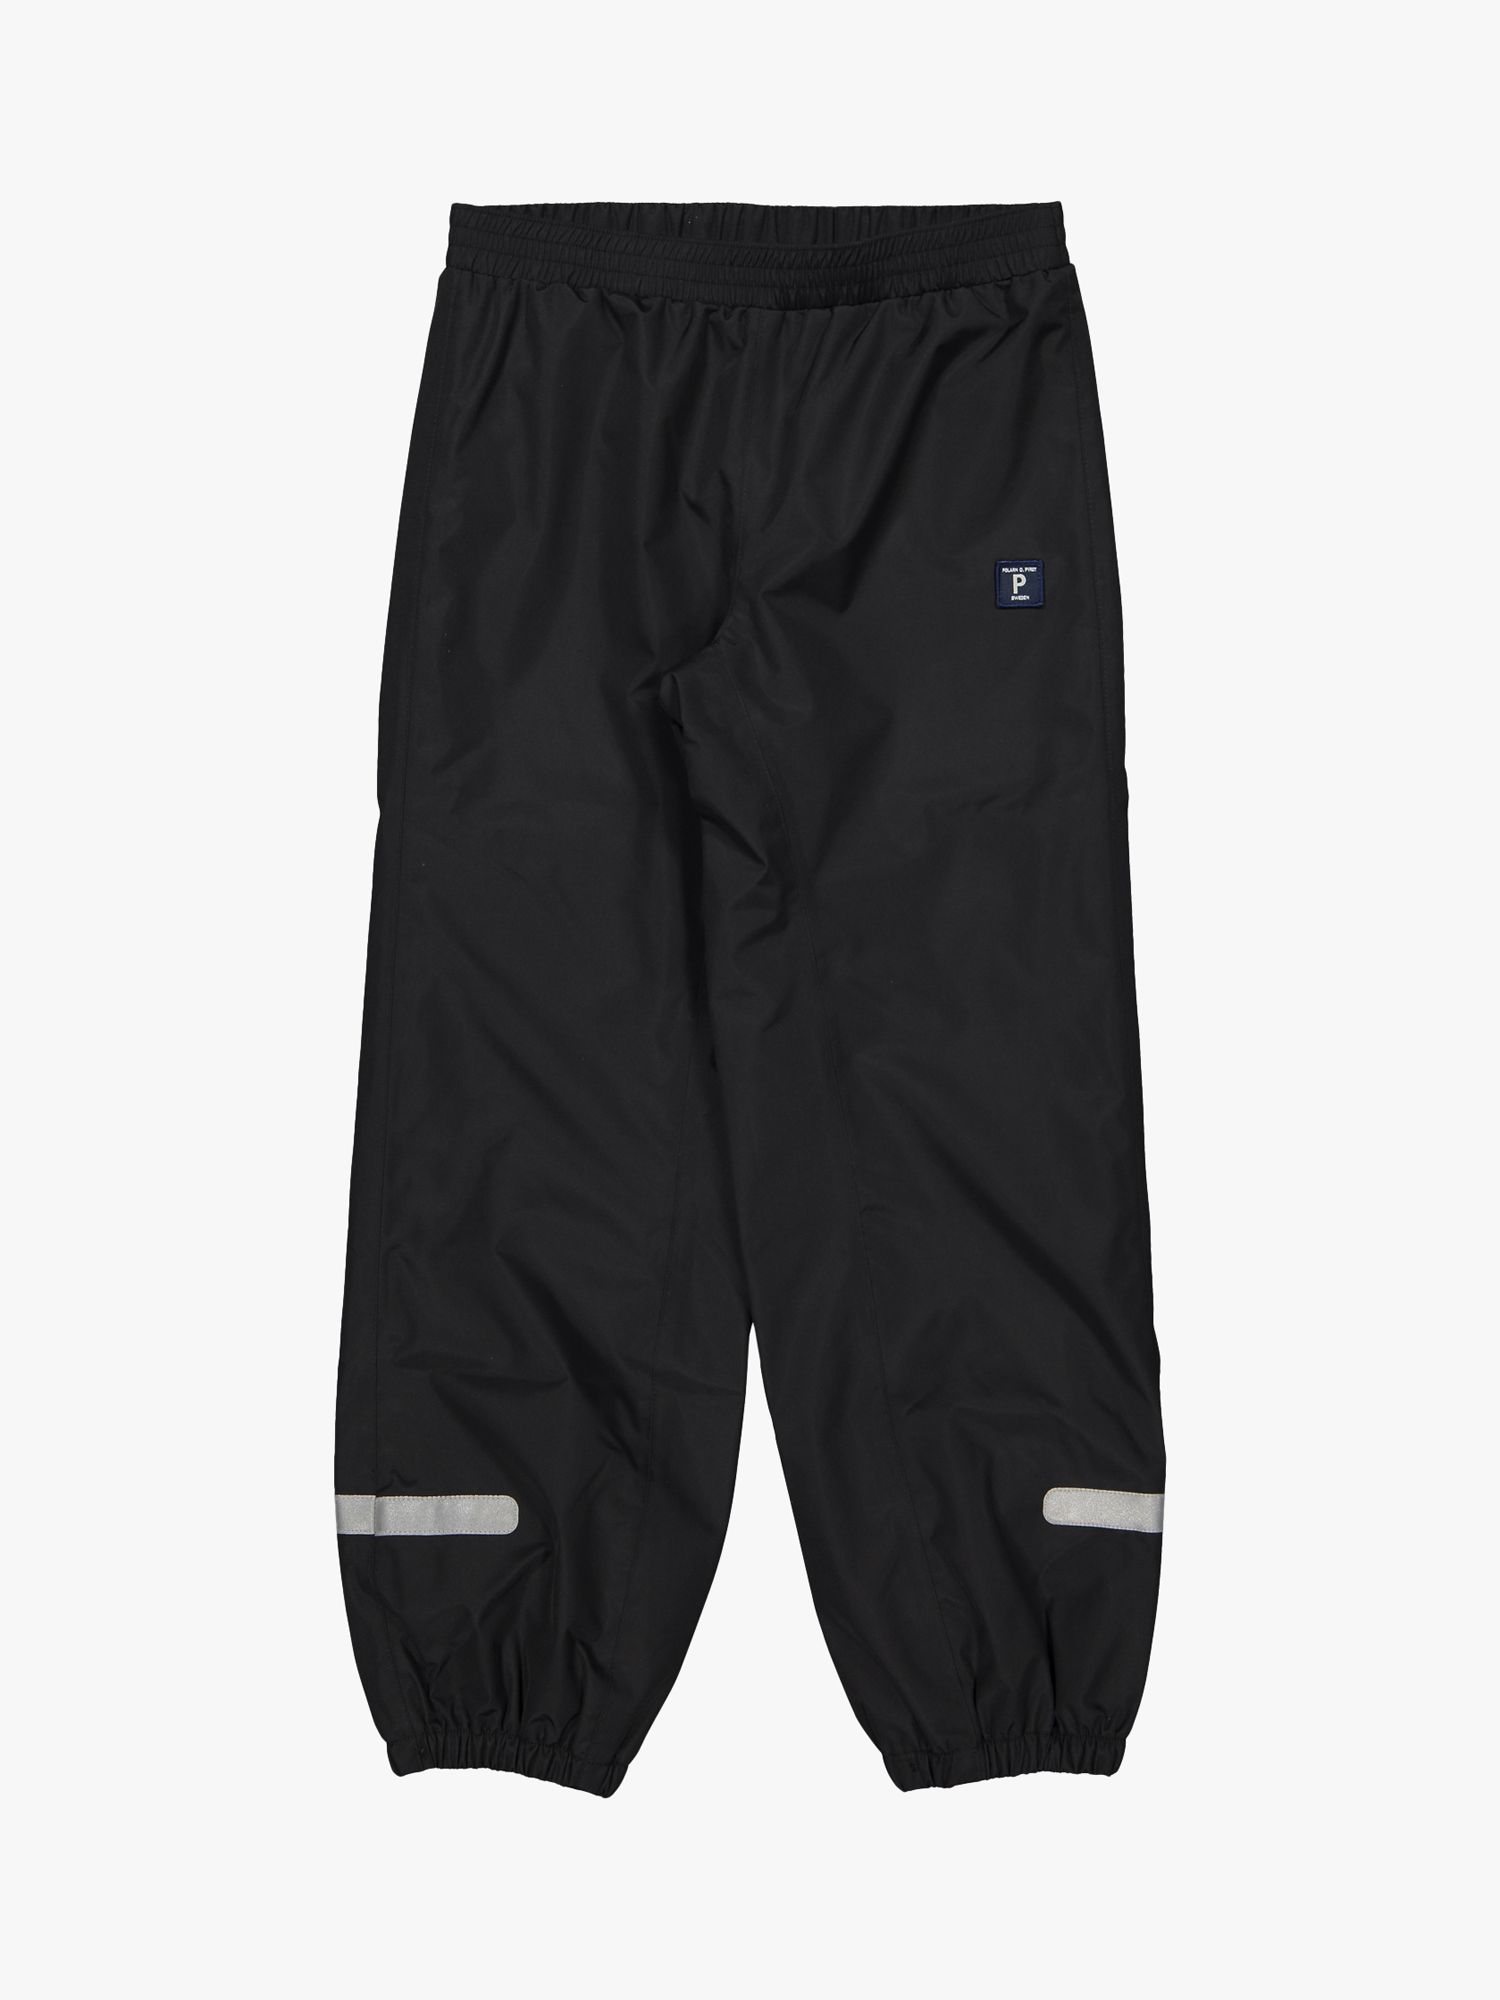 Buy Polarn O. Pyret Kids' Shell Trousers, Black Online at johnlewis.com